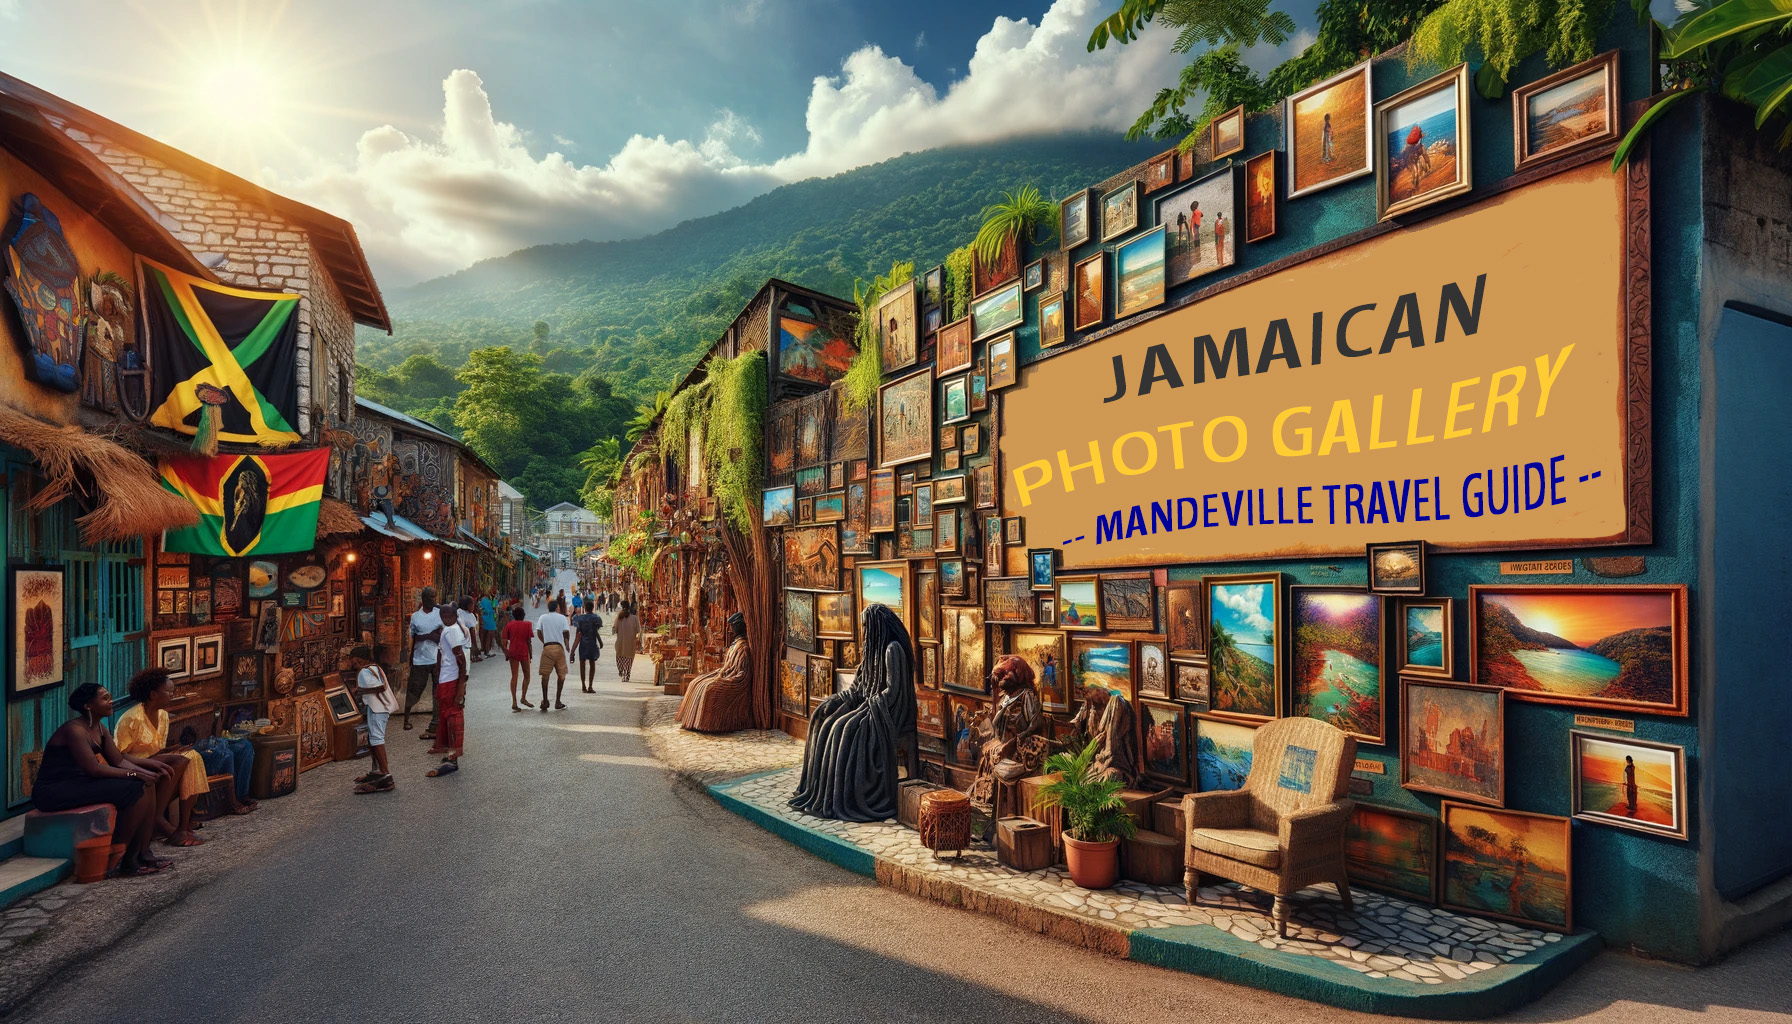 Jamaican Photo Gallery - Mandeville Travel Guide